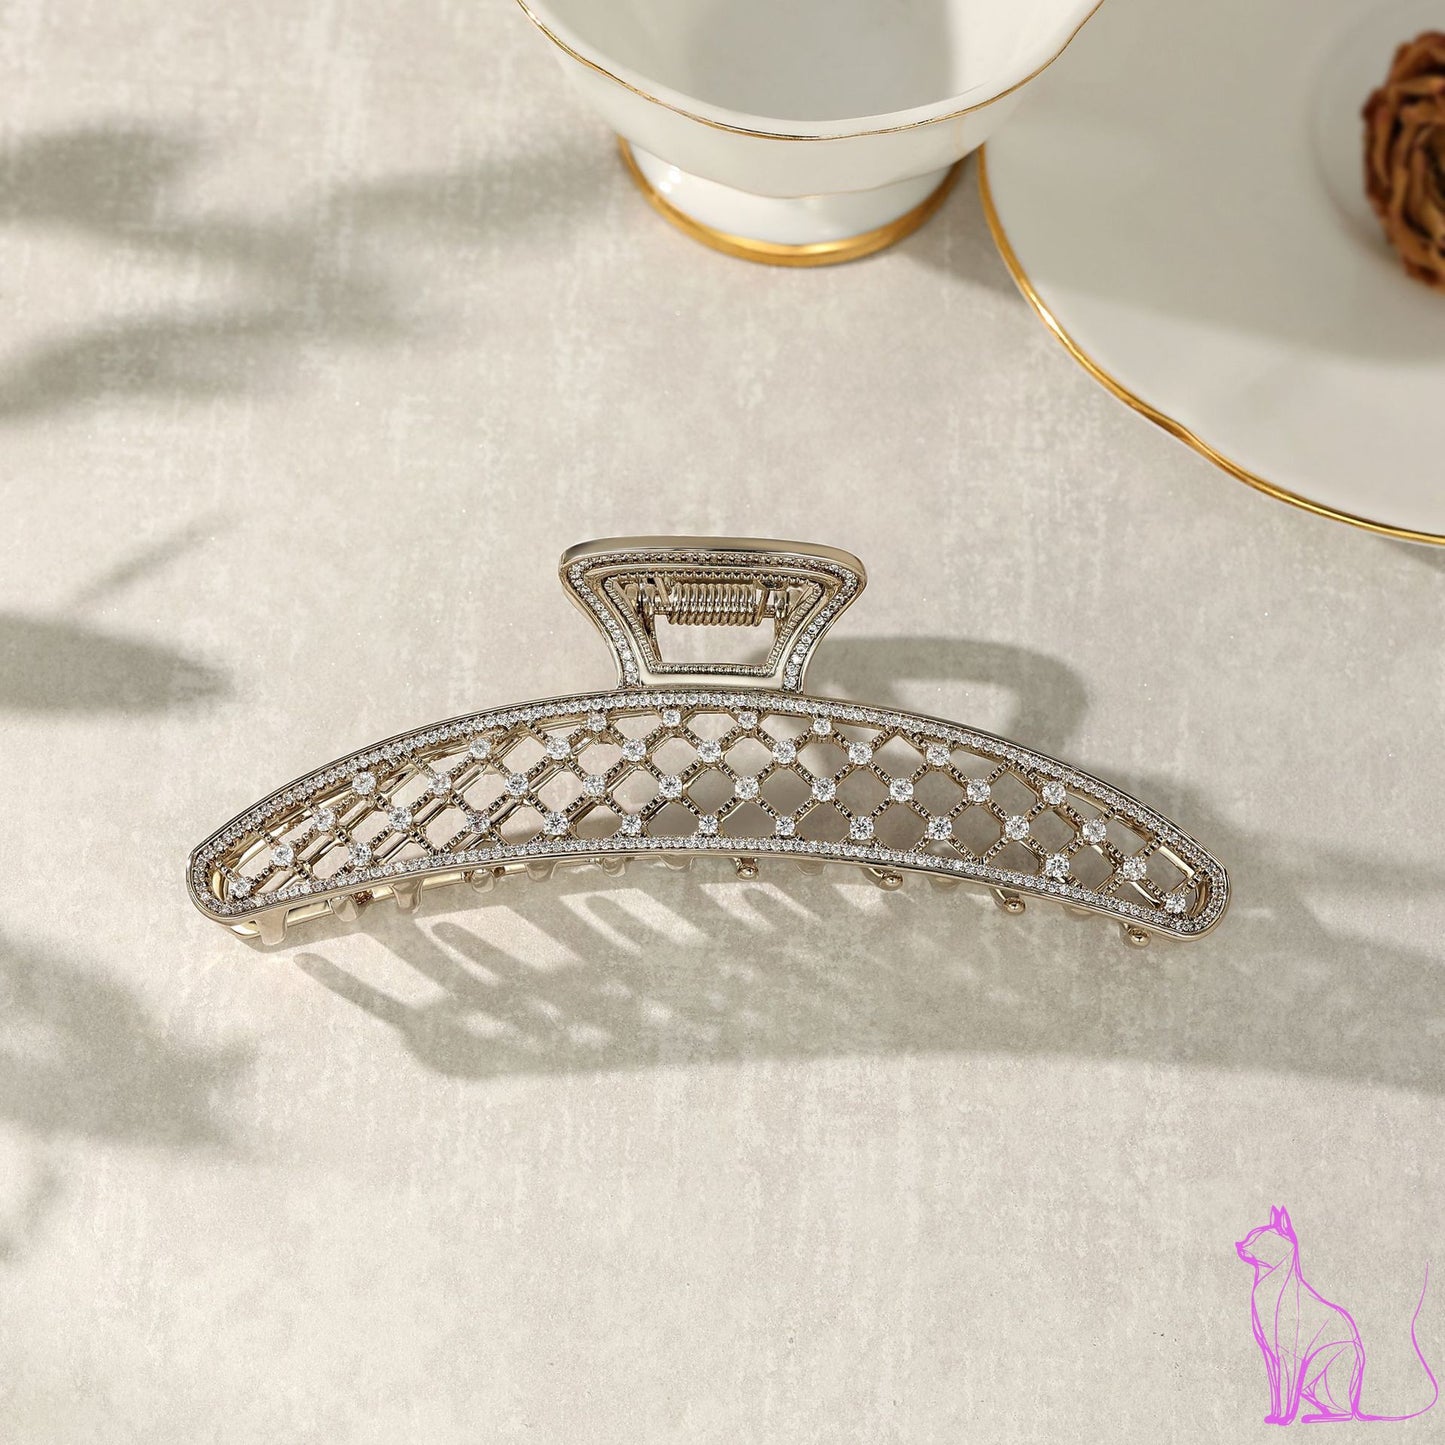 French designer's original design of light luxury and high-end, featuring a unique set of zircon hairpins and a shark clip for a female hairpin